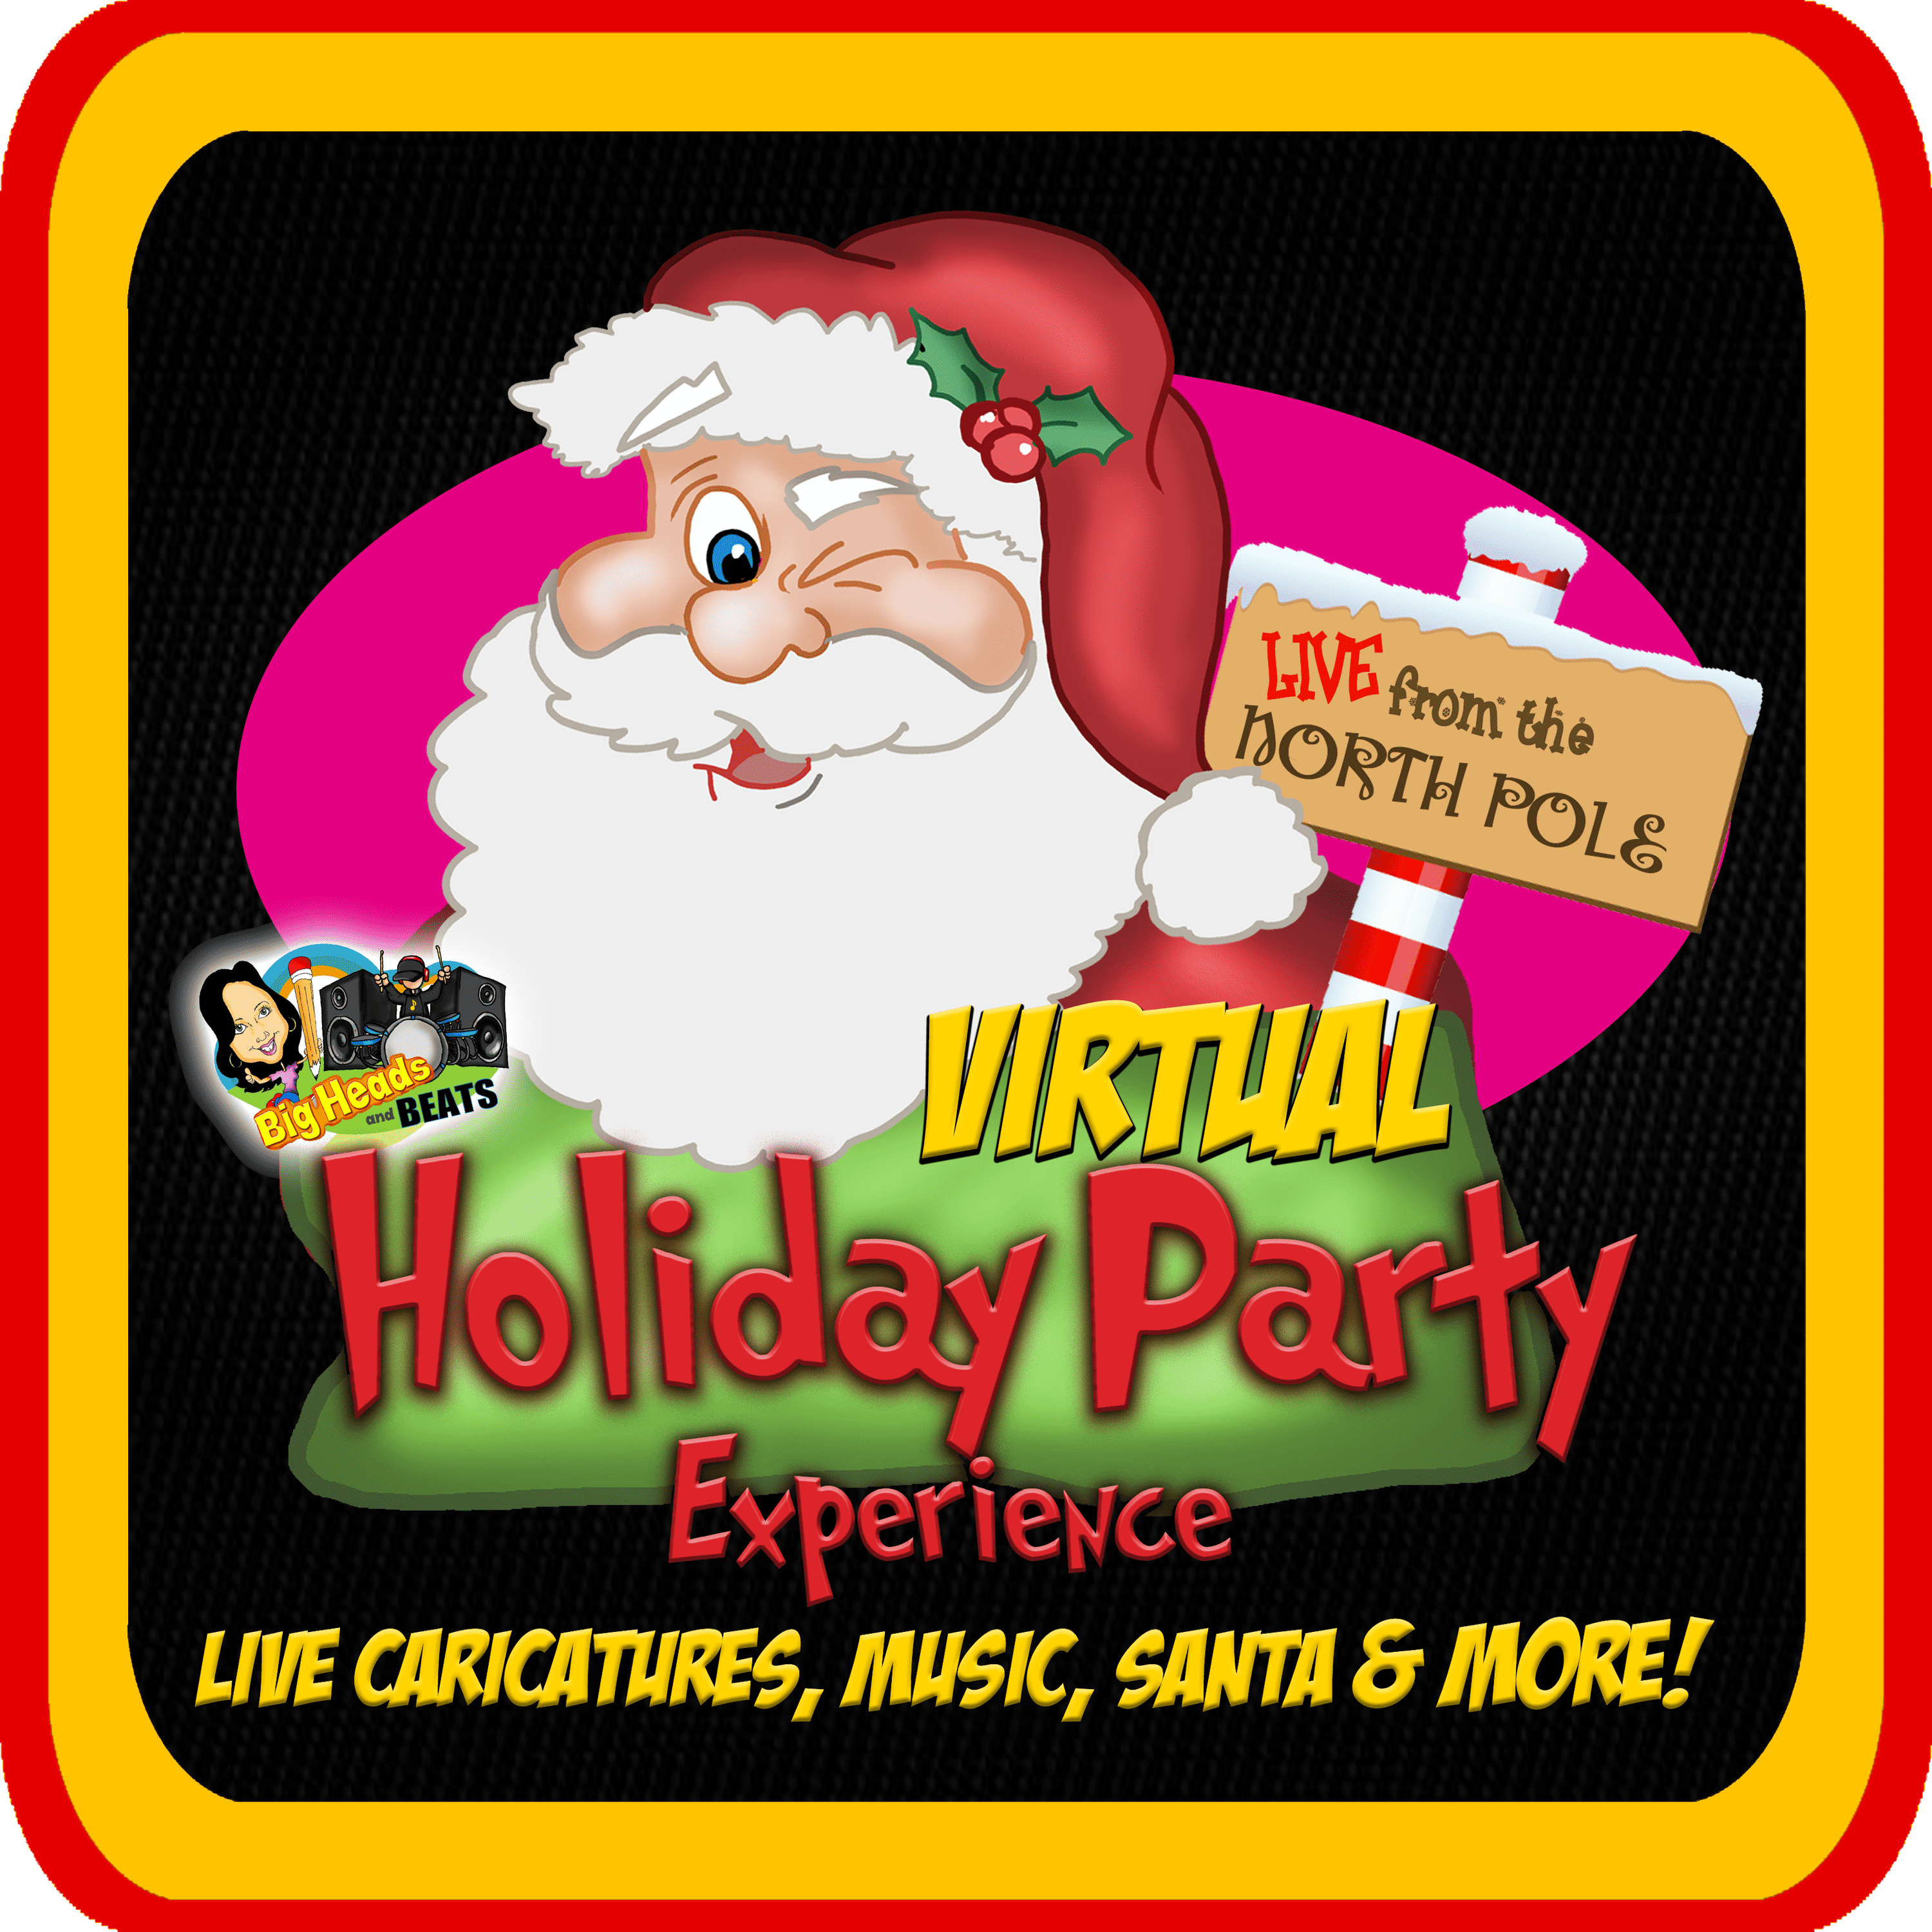 Virtual Holiday Party, Zoom Holiday Party, Virtual Christmas Party, Virtual Santa, Zoom with Santa, Virtual Holiday, Virtual Team Building, Virtual Corproate Party, Virtual Entertainment, Corporate Team Building, Corporate Holiday Gift Ideas